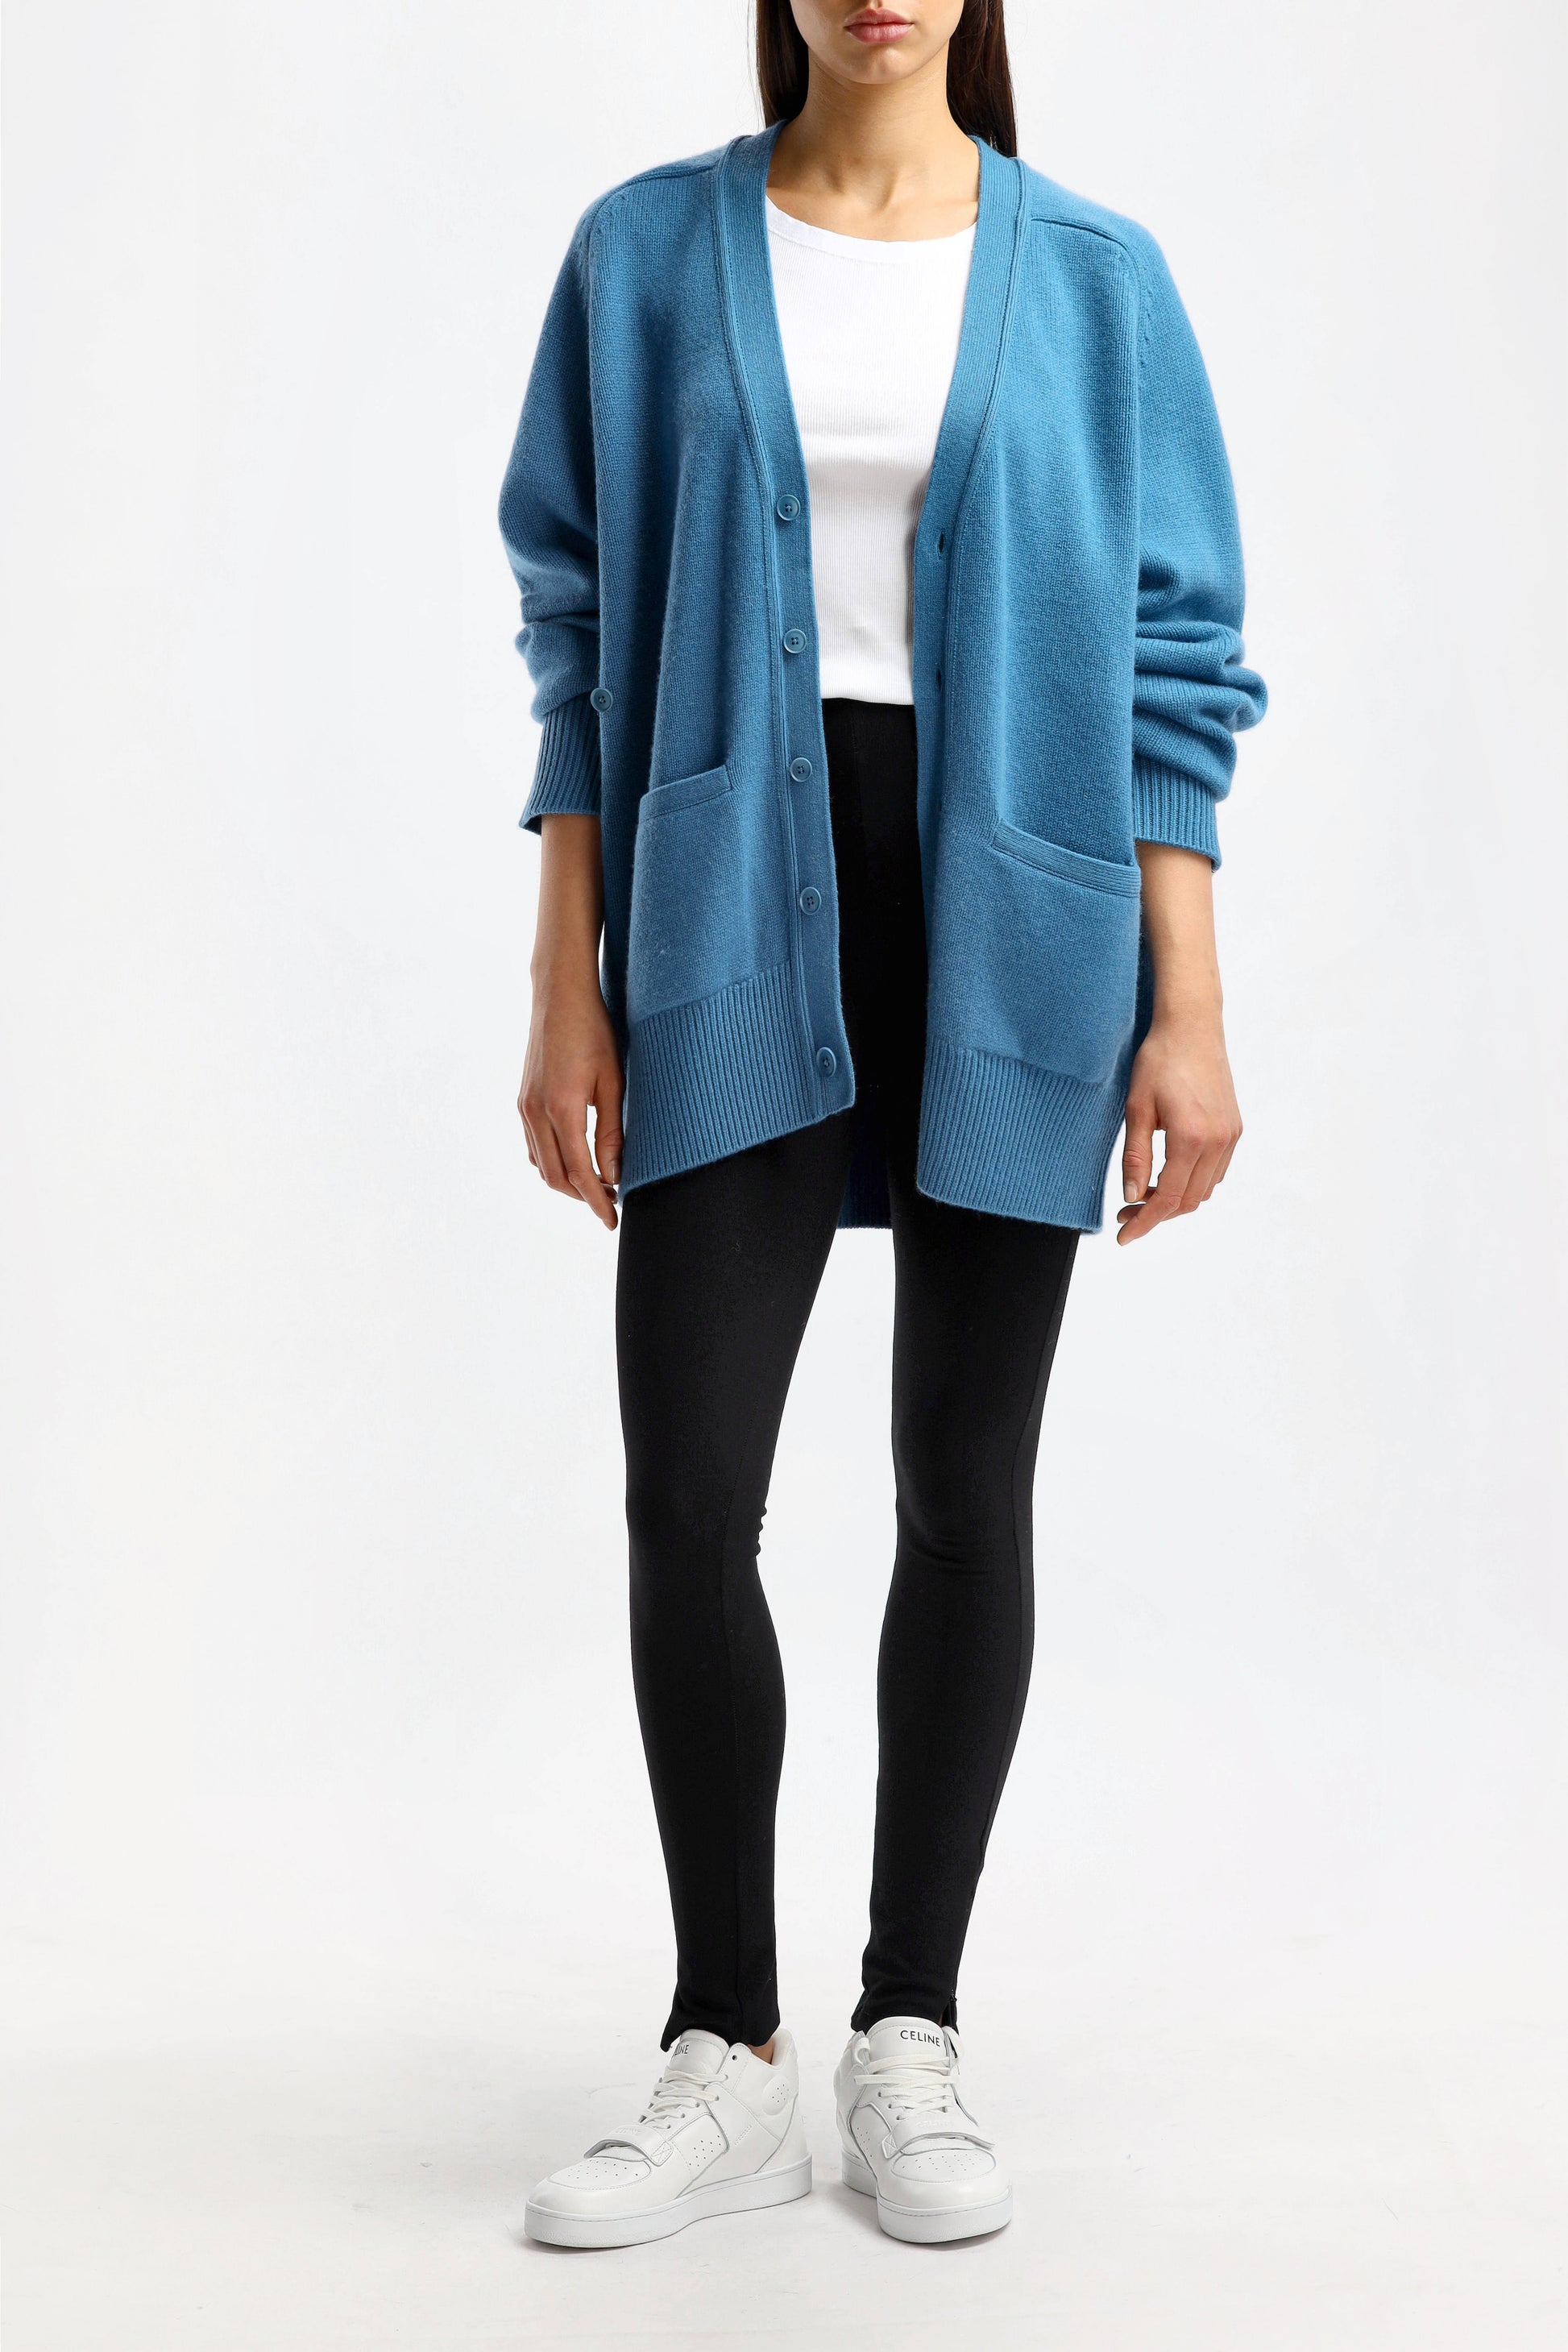 Cardigan Papilli N° 244 in AguaExtreme Cashmere - Anita Hass